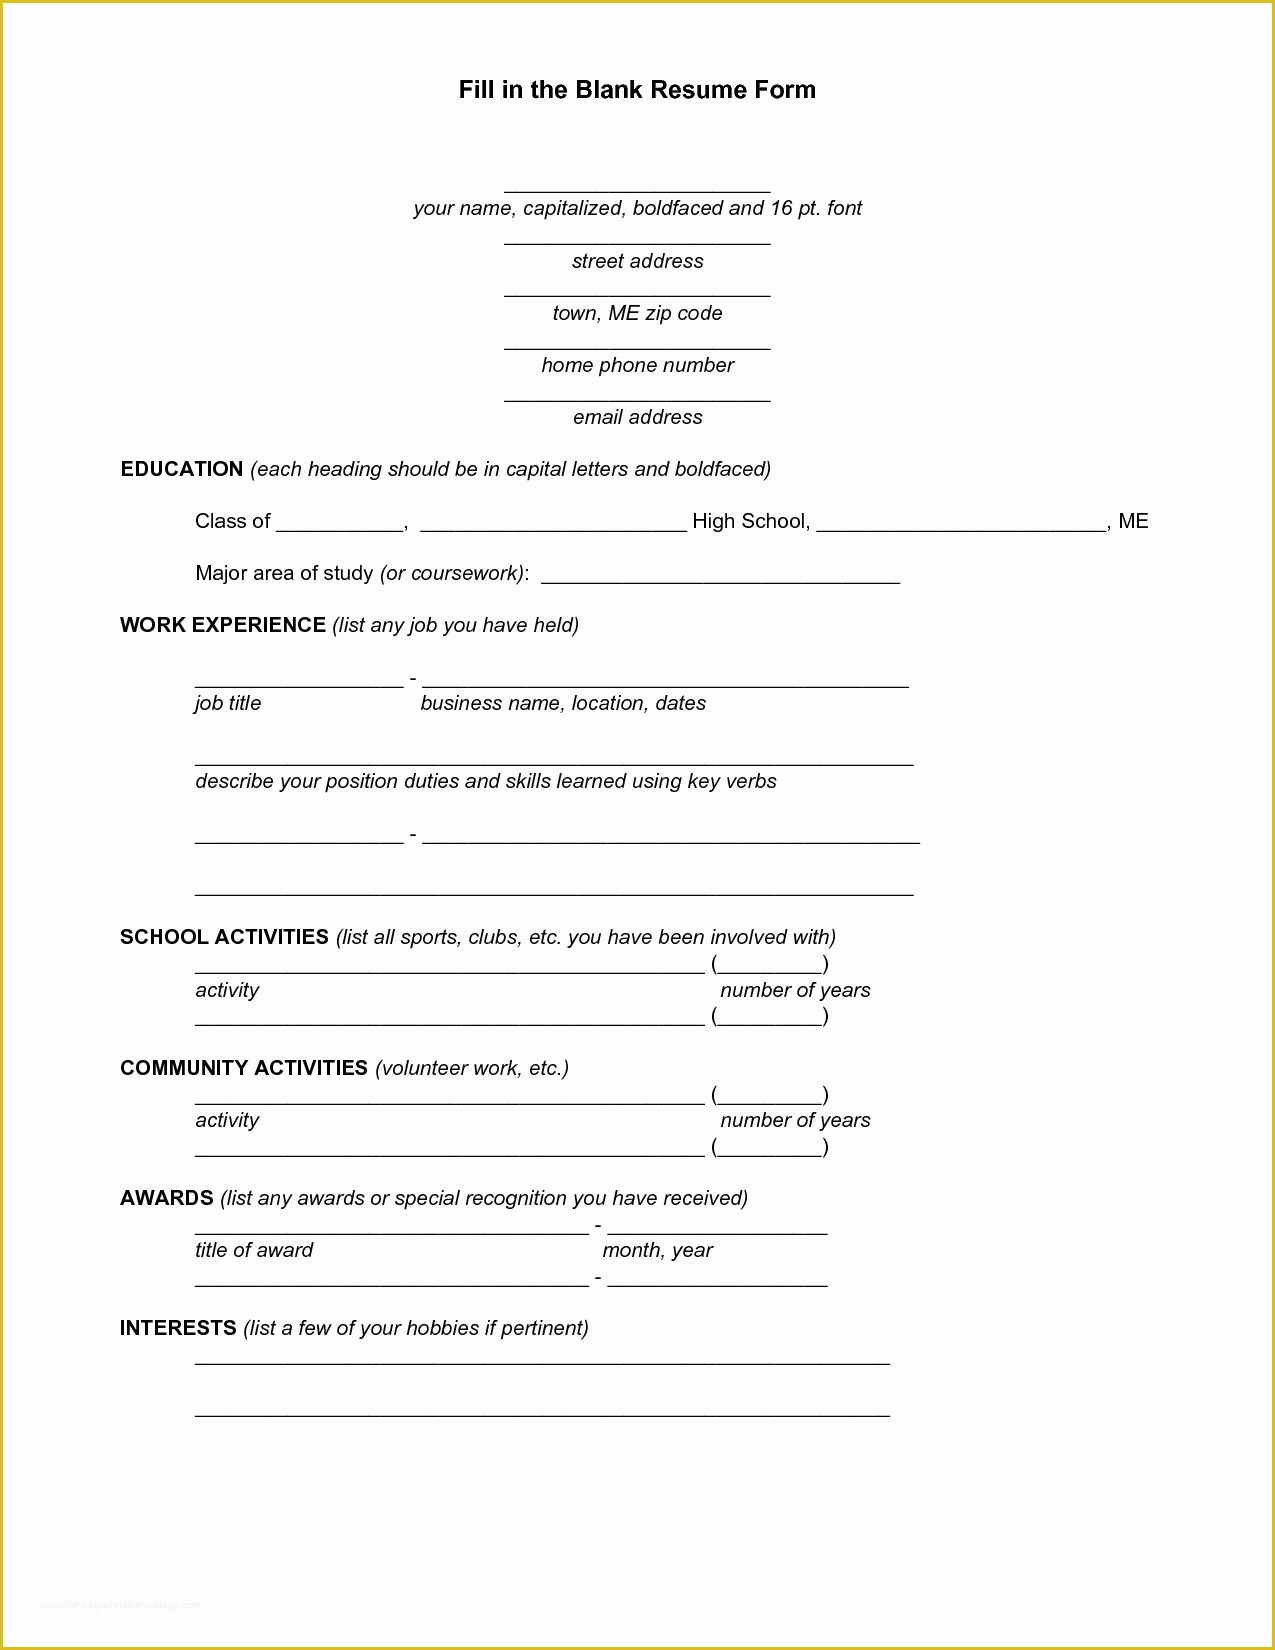 Free College Resume Templates Of Blank Resume Template for High School Students